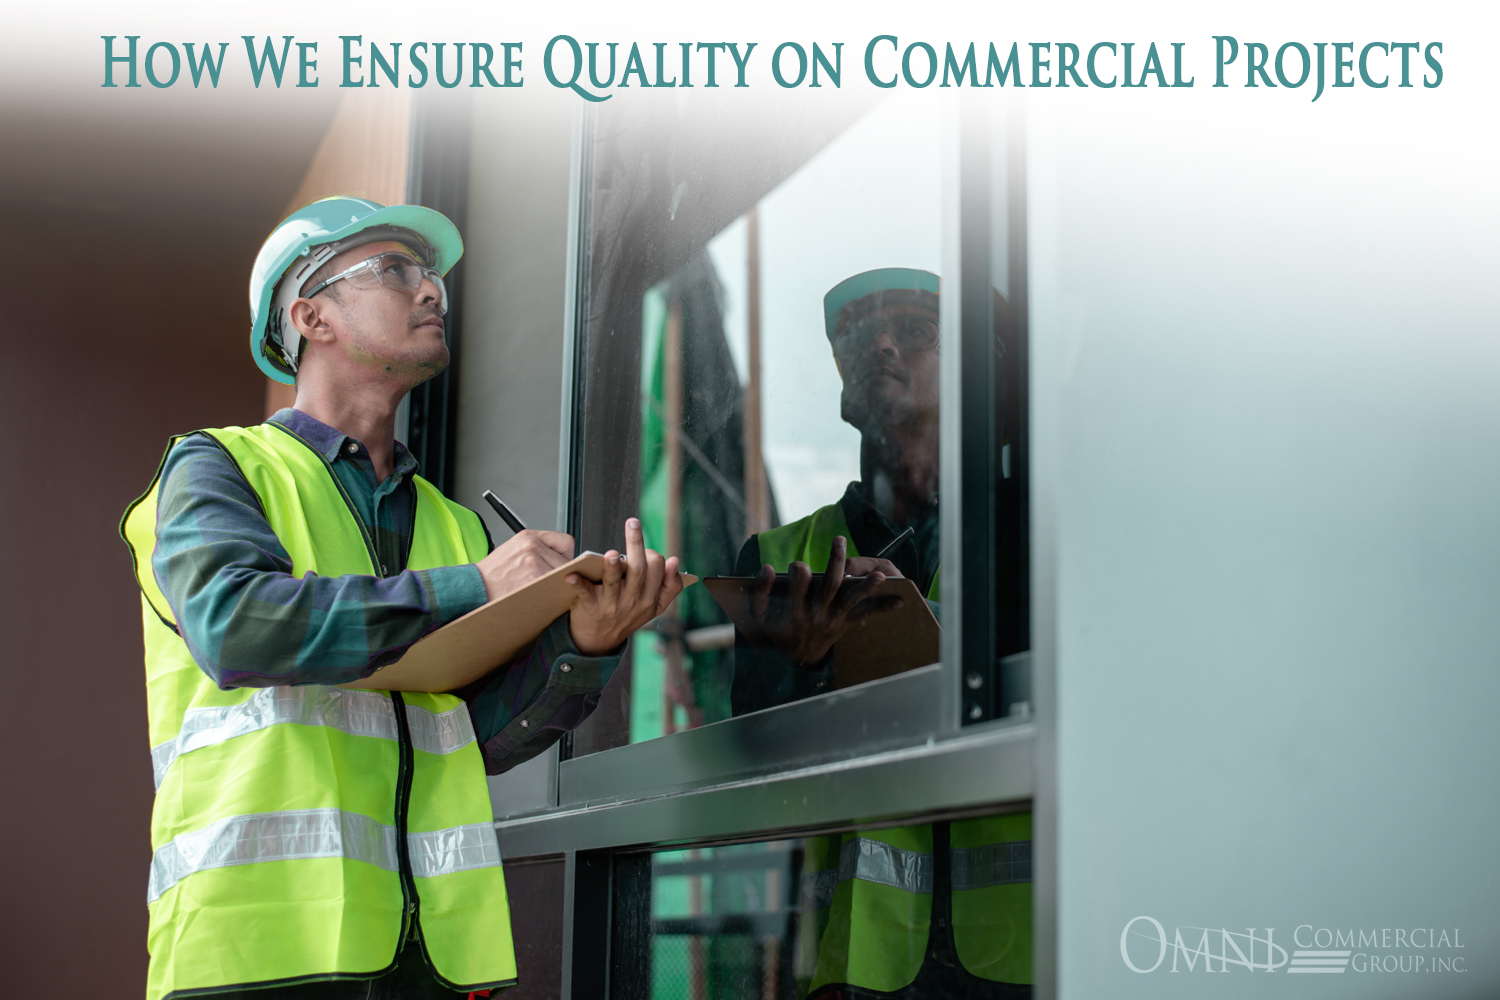 Ensure Quality on Commercial Projects